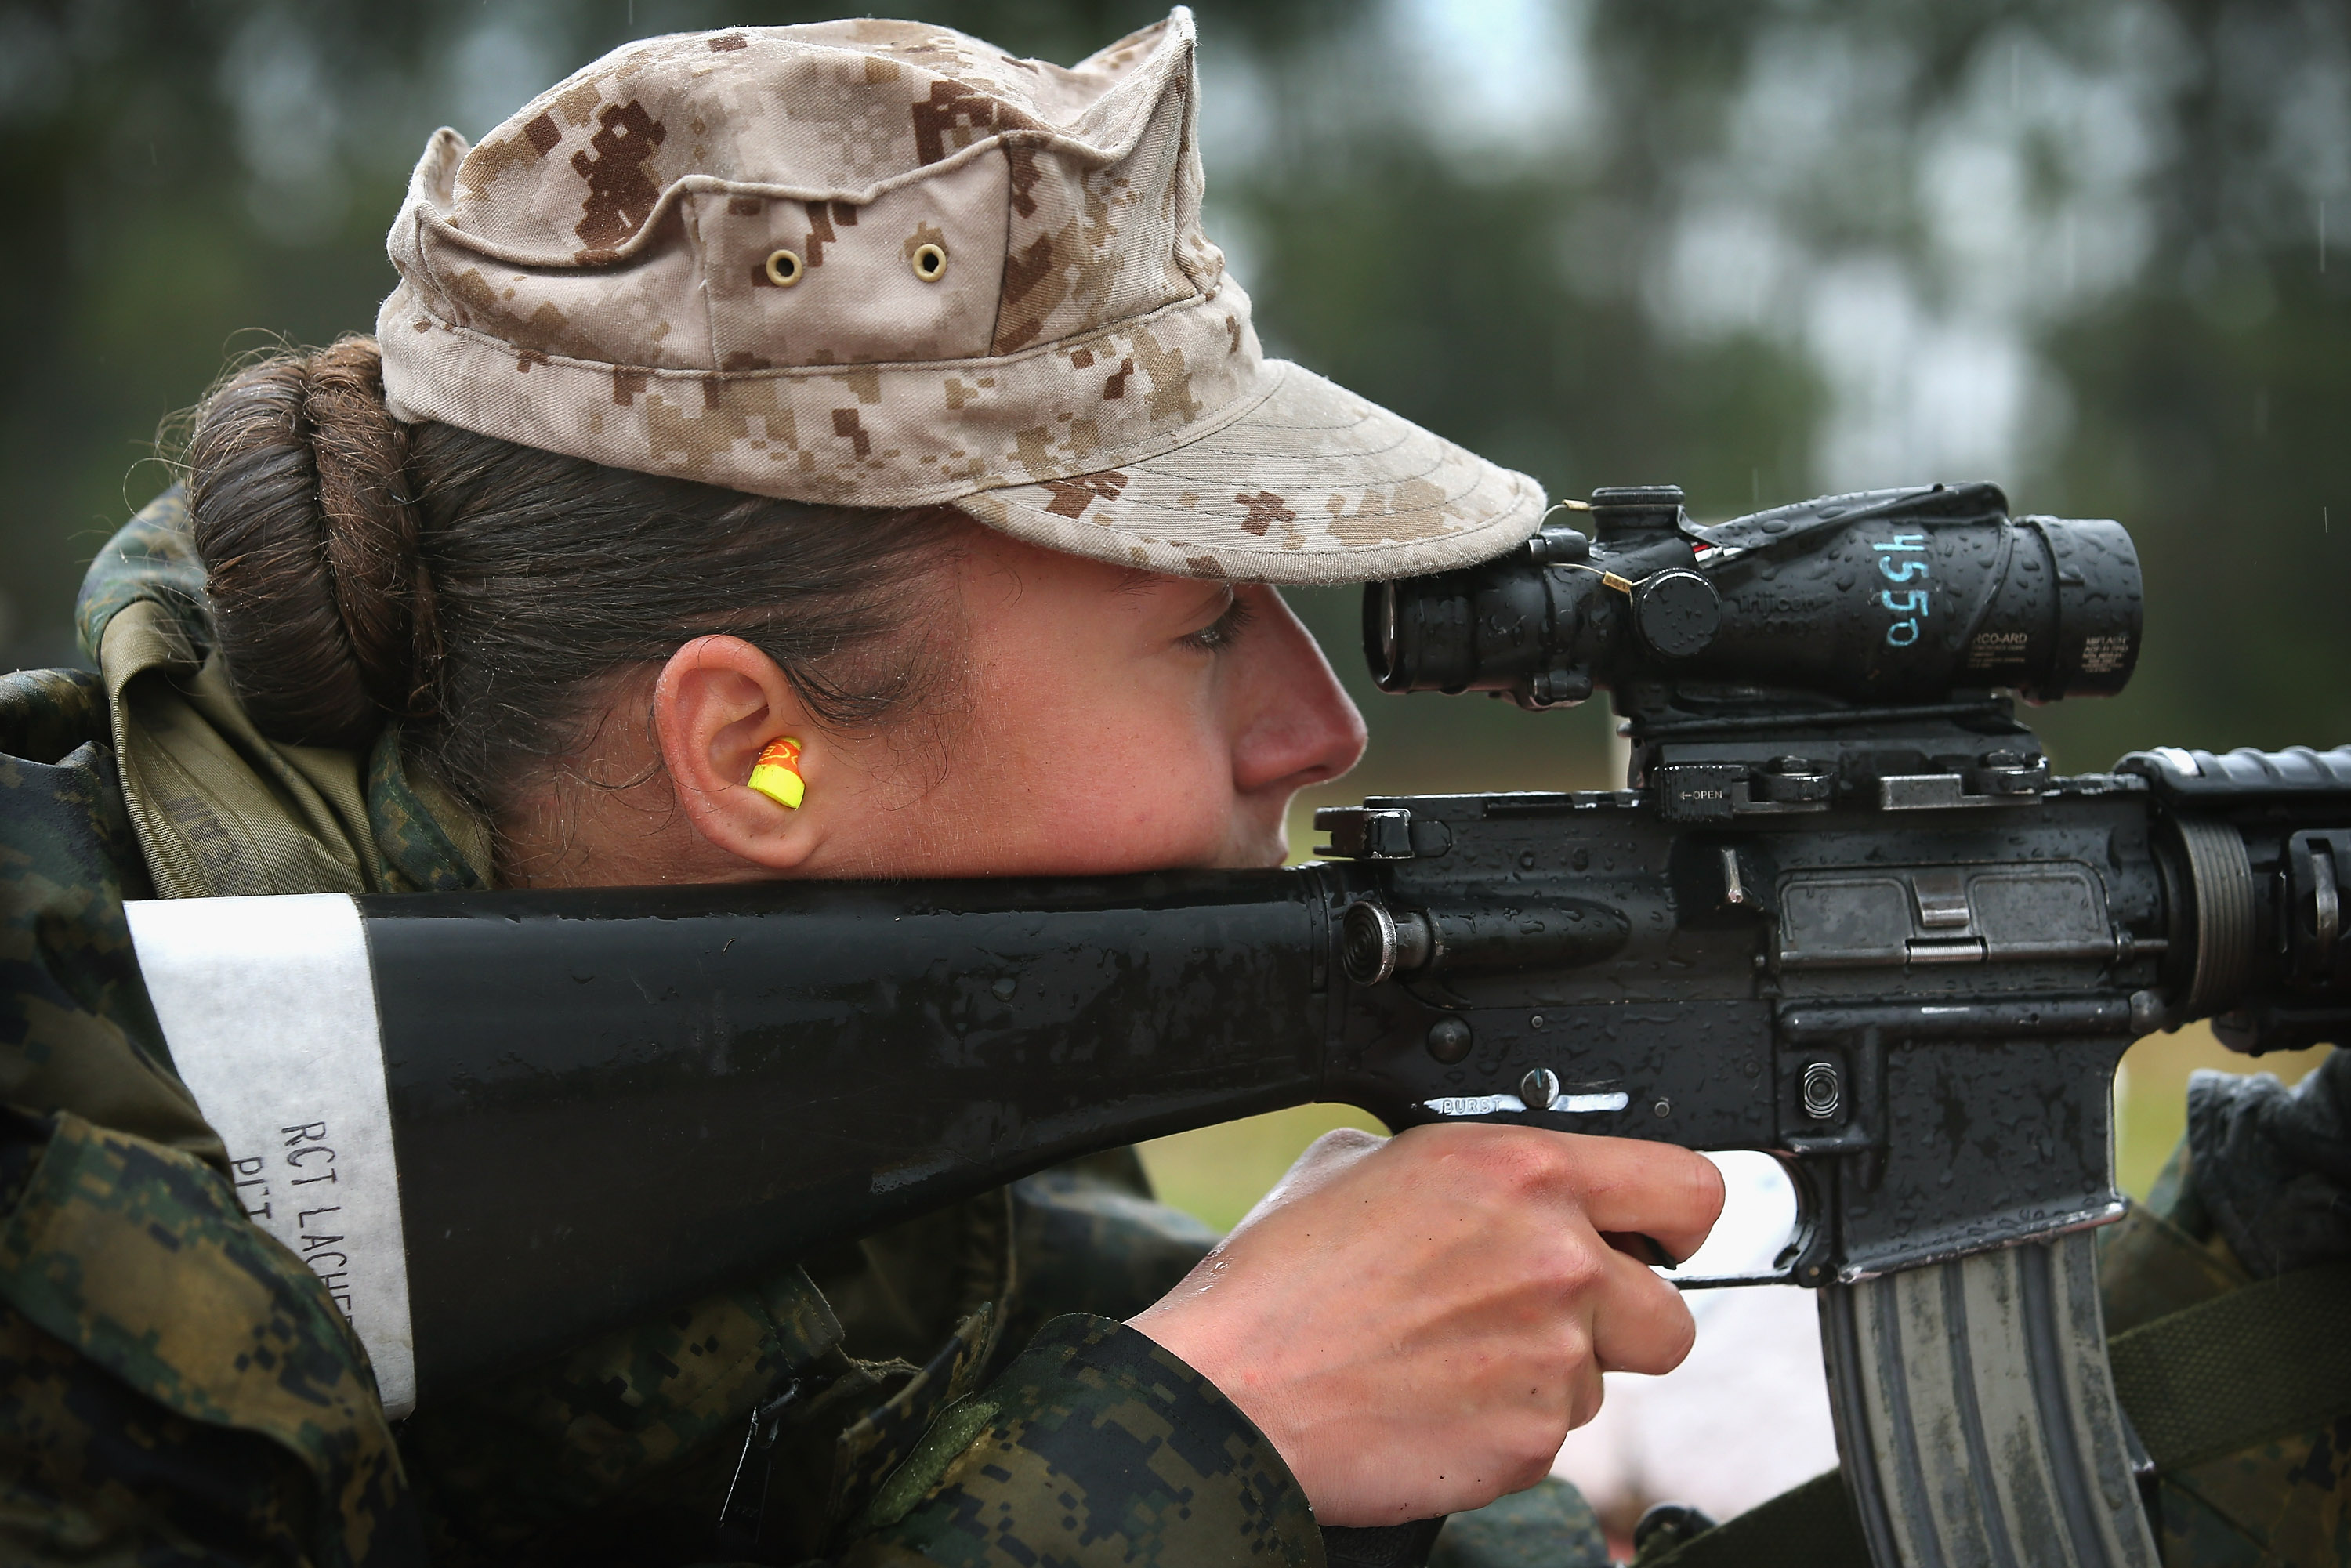 Marine recruit Cora Ann Lacher from Manuet, NY fires on the rifle range during boot camp on Feb. 25, 2013. (Scott Olson—Getty Images)